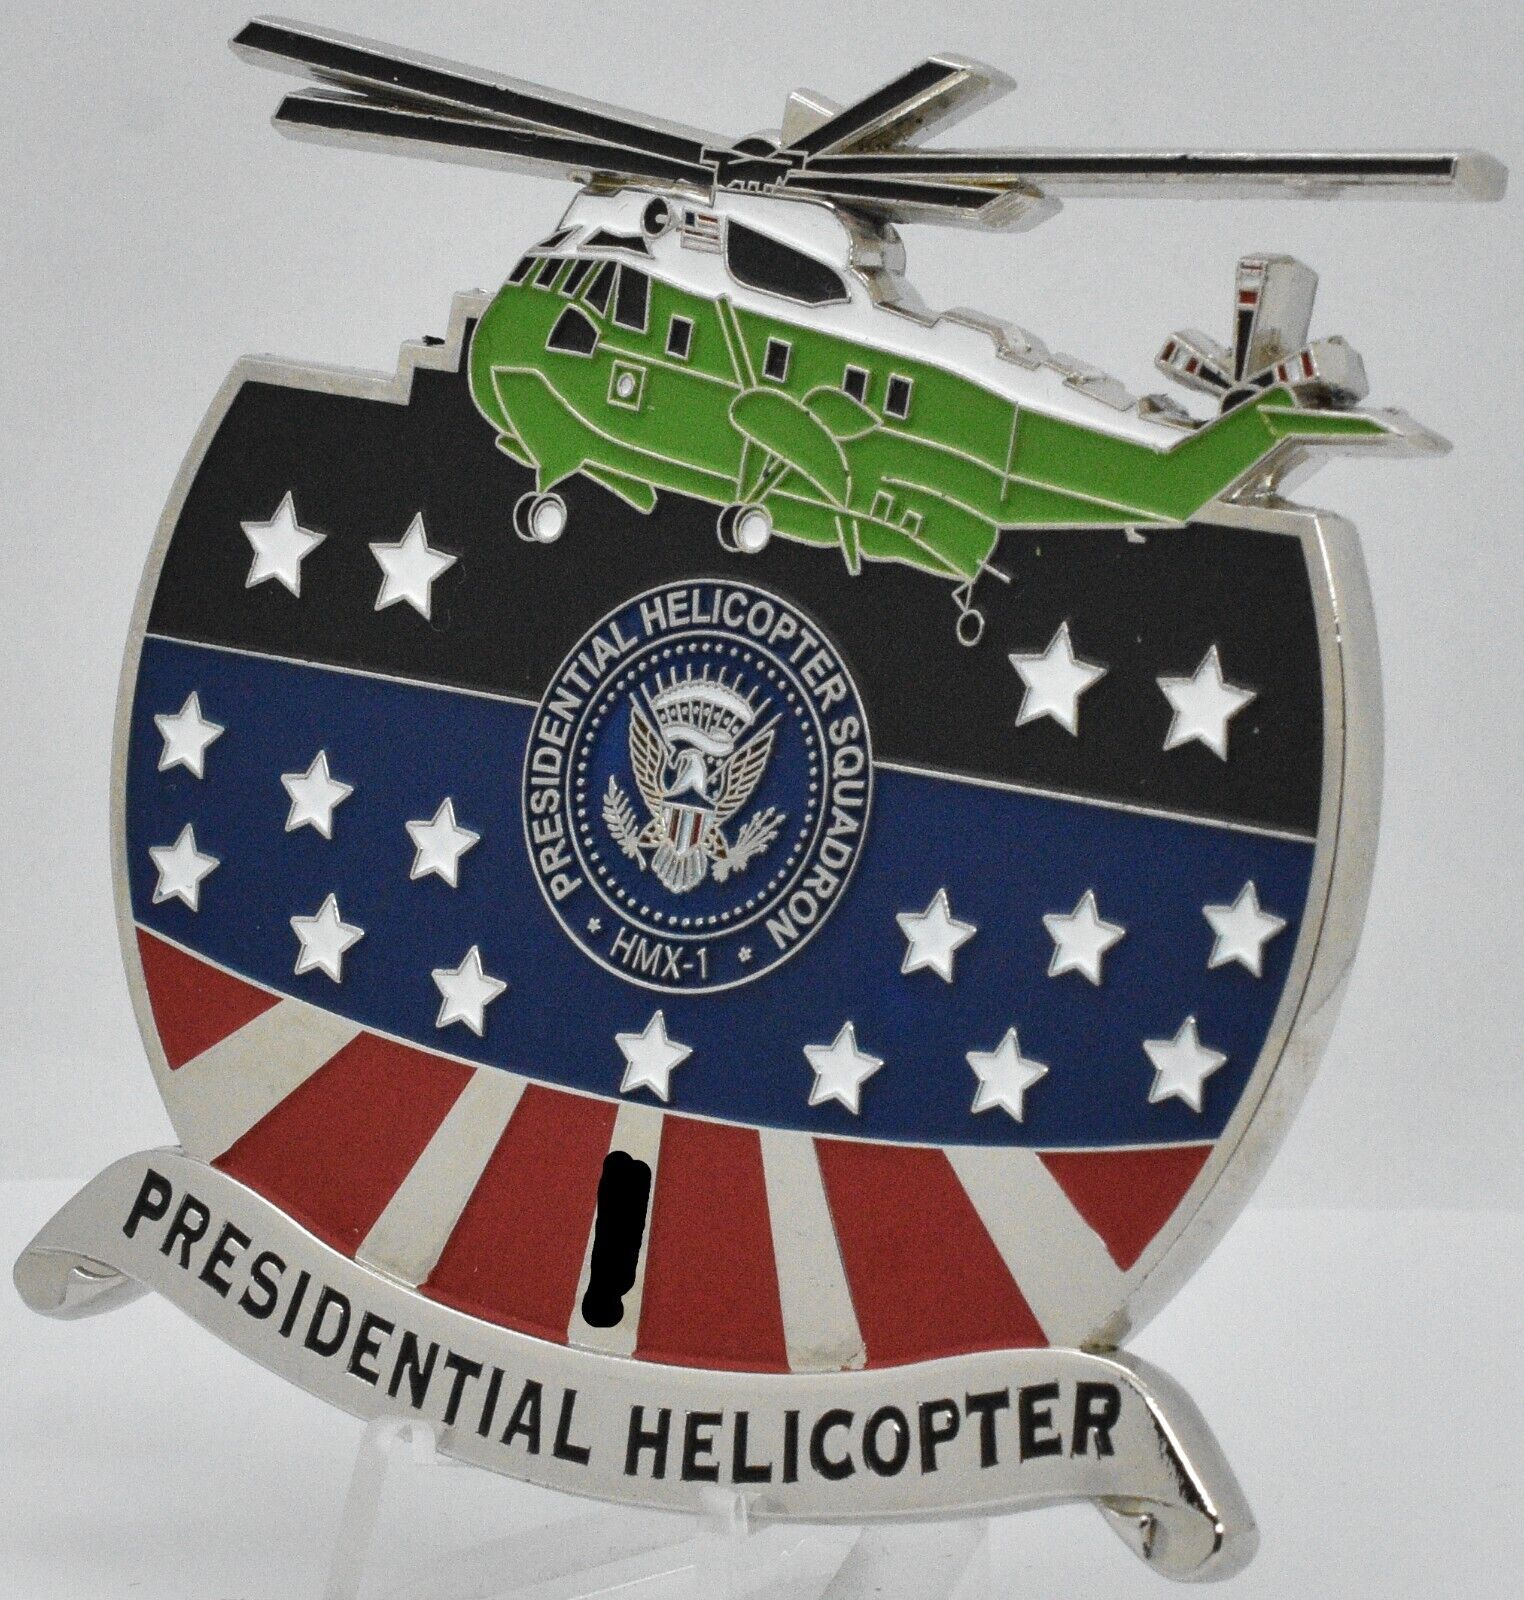 Marine One USMC HMX-1 Presidential Helicopter Squadron Numbered Challenge Coin